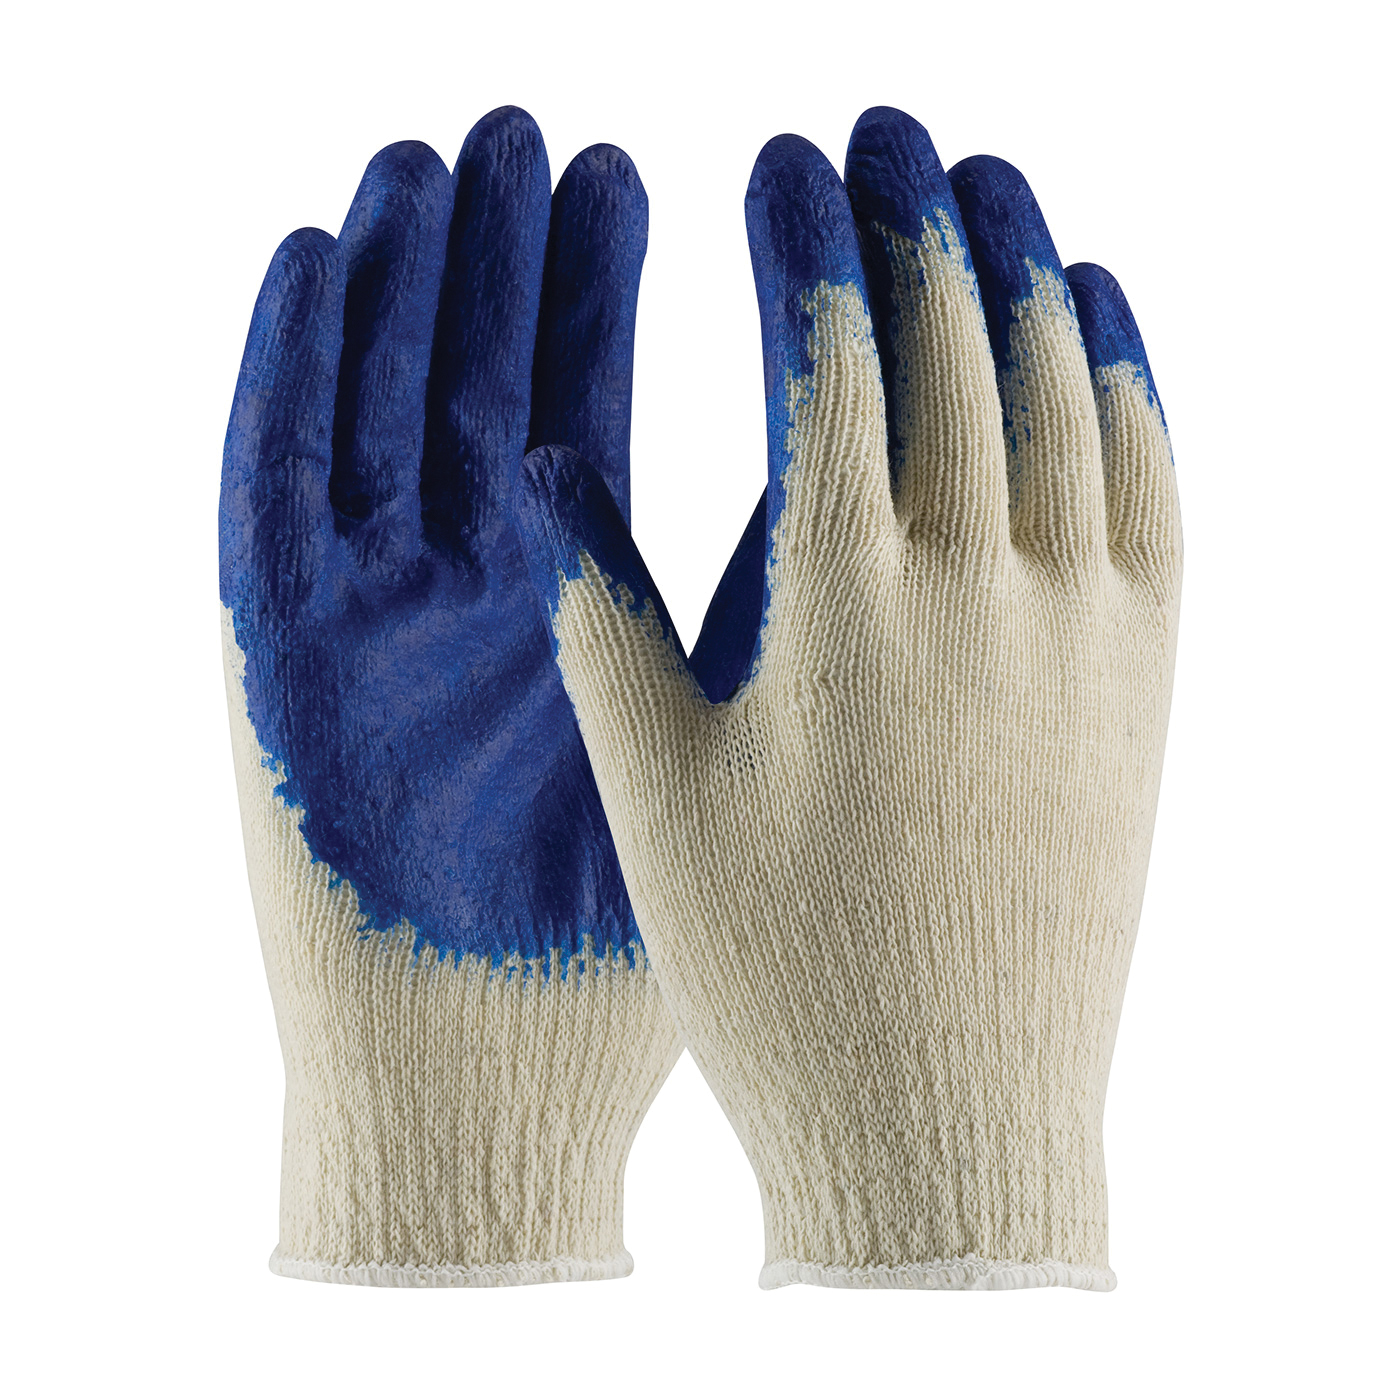 PIP® 39-C120/L Economy Grade Medium Weight Gloves, Coated, Seamless Knit Style, L, Latex Palm, Cotton/Polyester, Blue/Natural, Continuous Knit Wrist Cuff, Latex Coating, Resists: Abrasion, Cut, Puncture and Tear, Unlined Lining